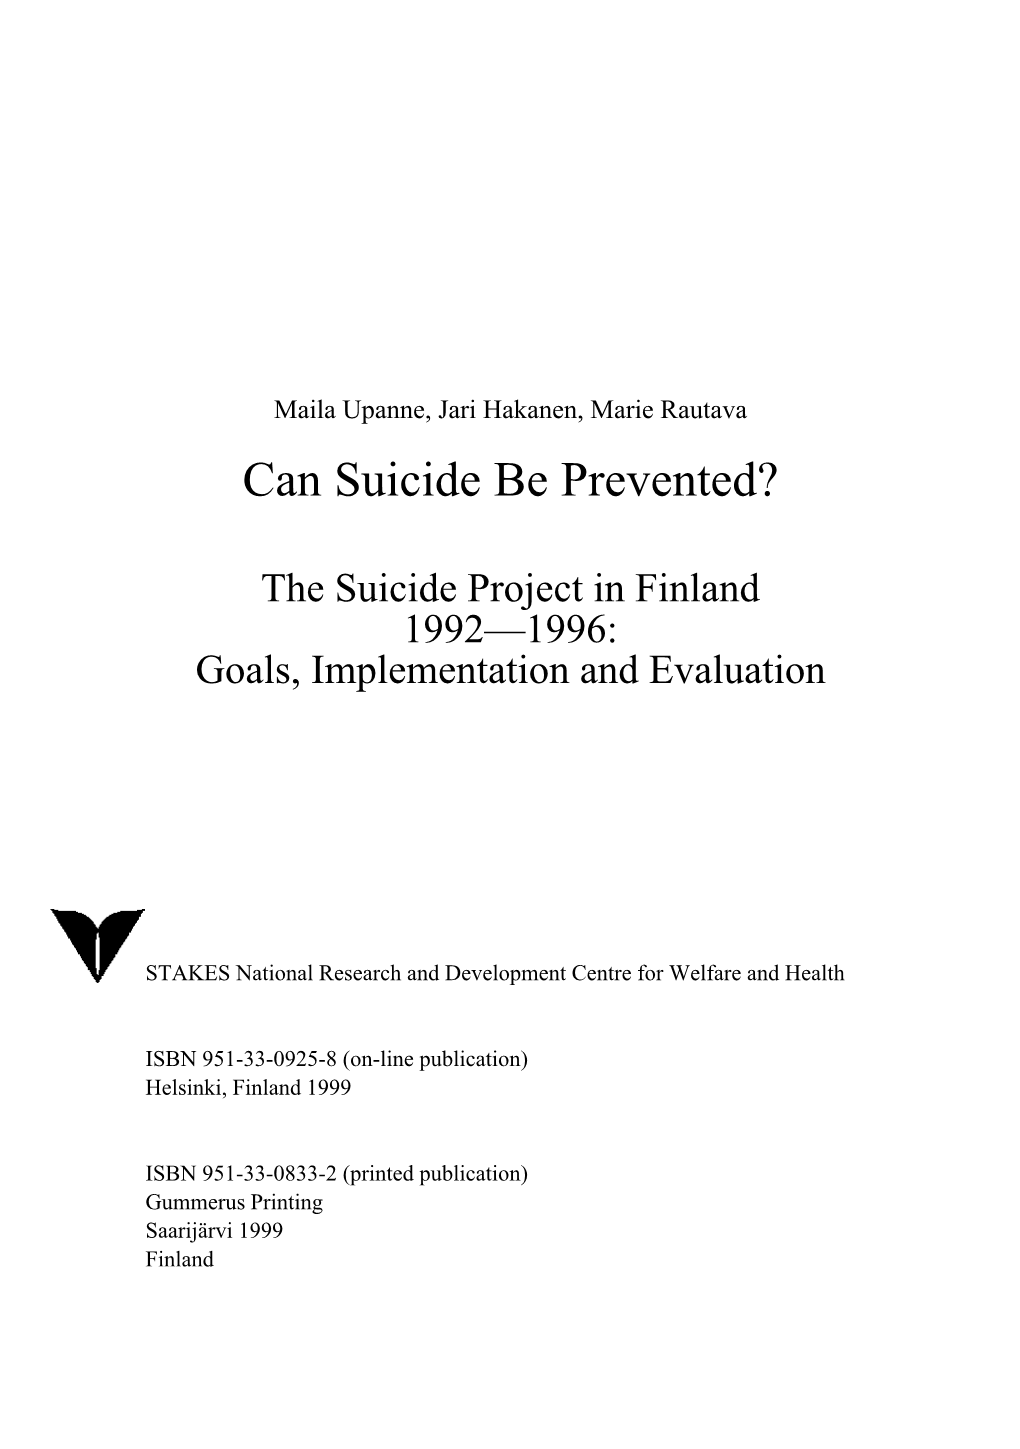 Can Suicide Be Prevented?